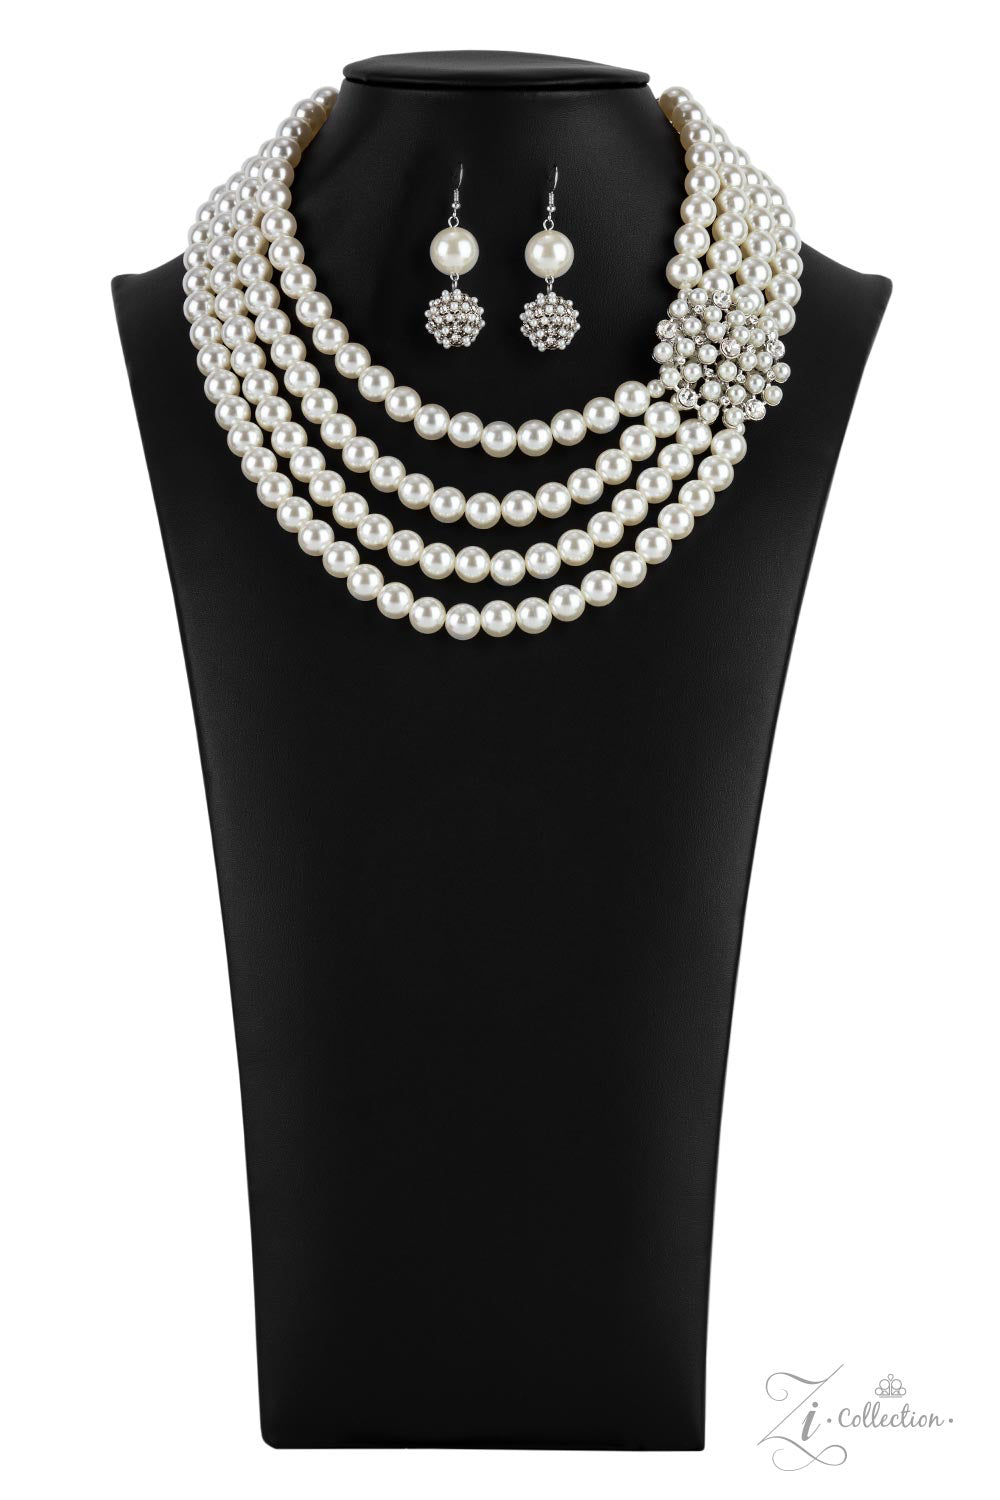 Romantic - White Pearl 2021 Zi Collection Necklaces inspired by royalty, an elegant explosion of classic white rhinestones and timeless pearls delicately coalesces into a vintage brooch. The refined ornament delicately holds together strands of oversized pearls, creating romantically regal layers below the collar. Features an adjustable clasp closure.  Sold as one individual necklace. Includes one pair of Earrings  